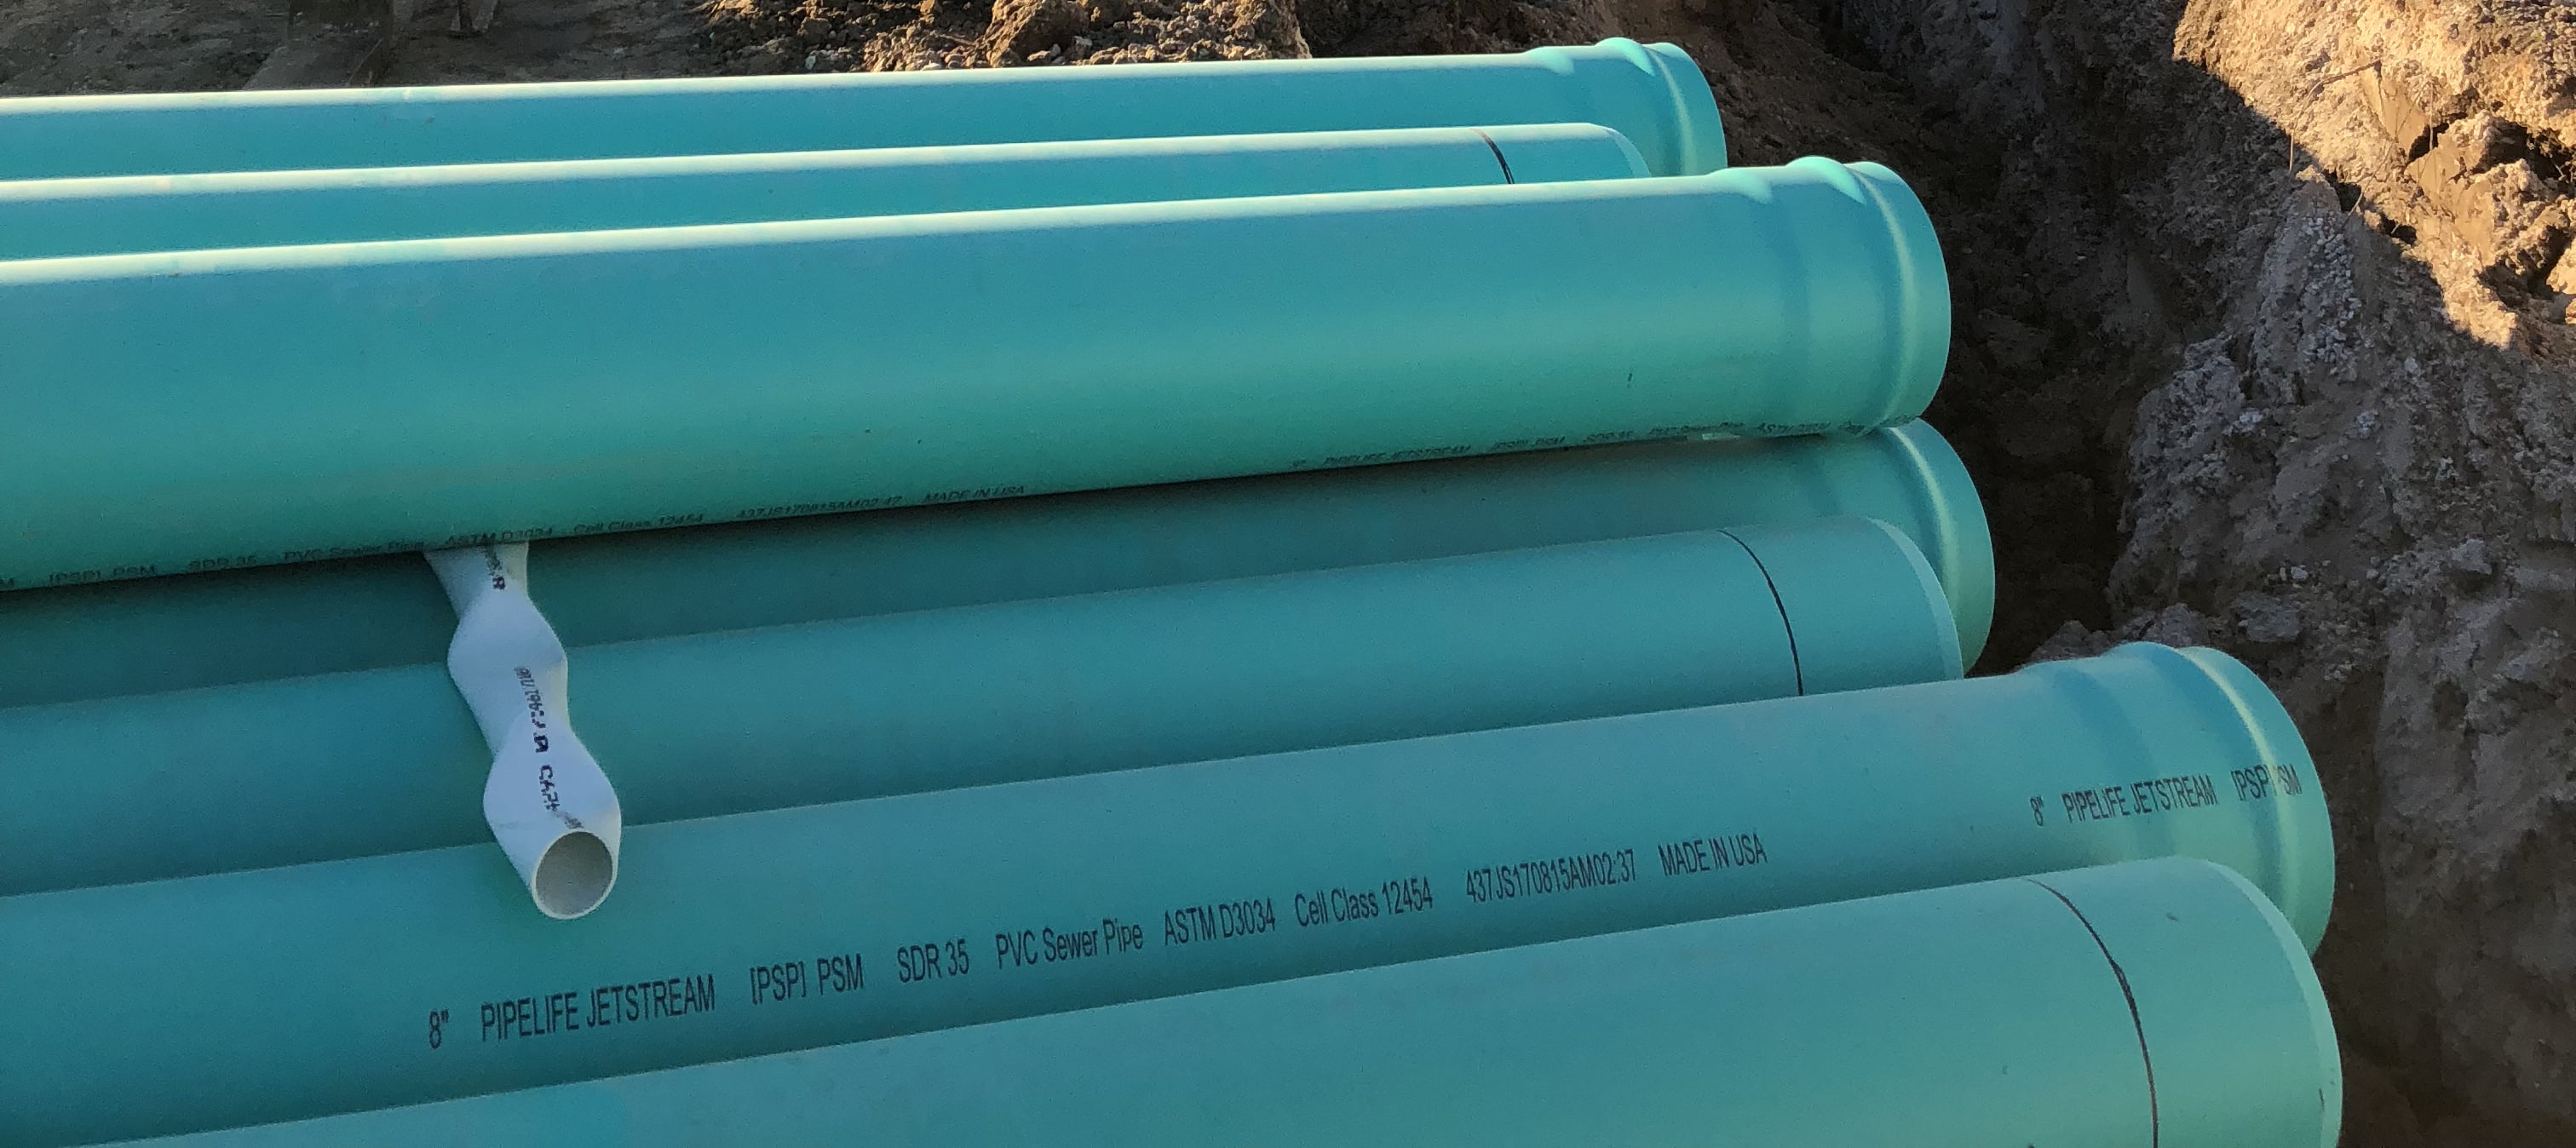 Campbell City Gravity Sewer Pipes